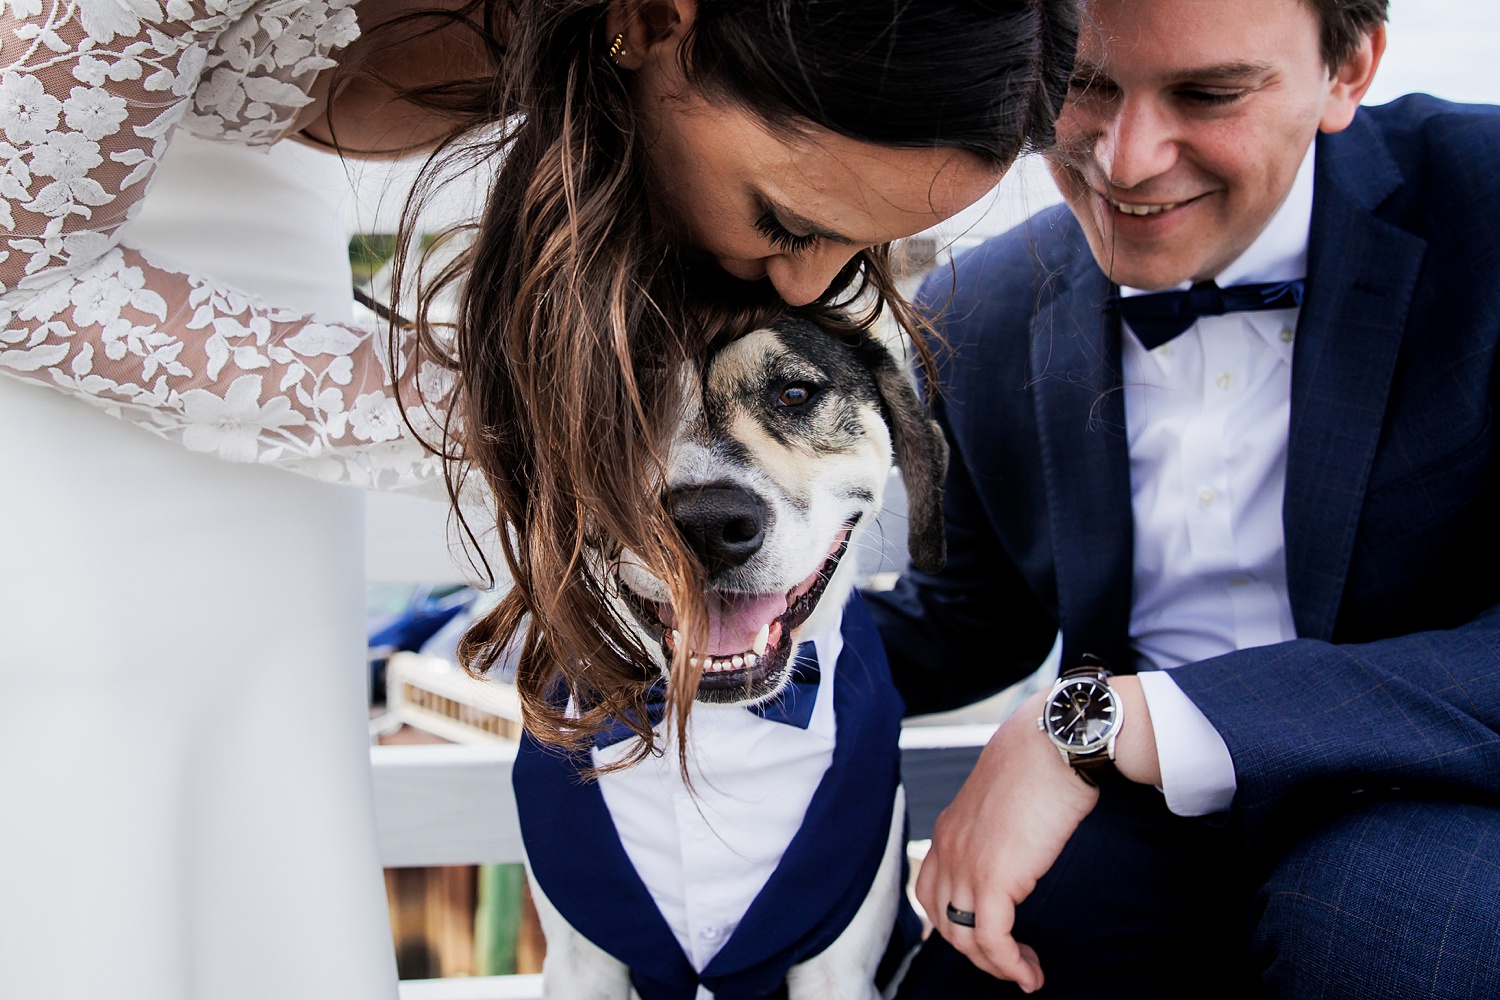 Puppy dog all wrapped up in love from his mom and dad on their wedding day